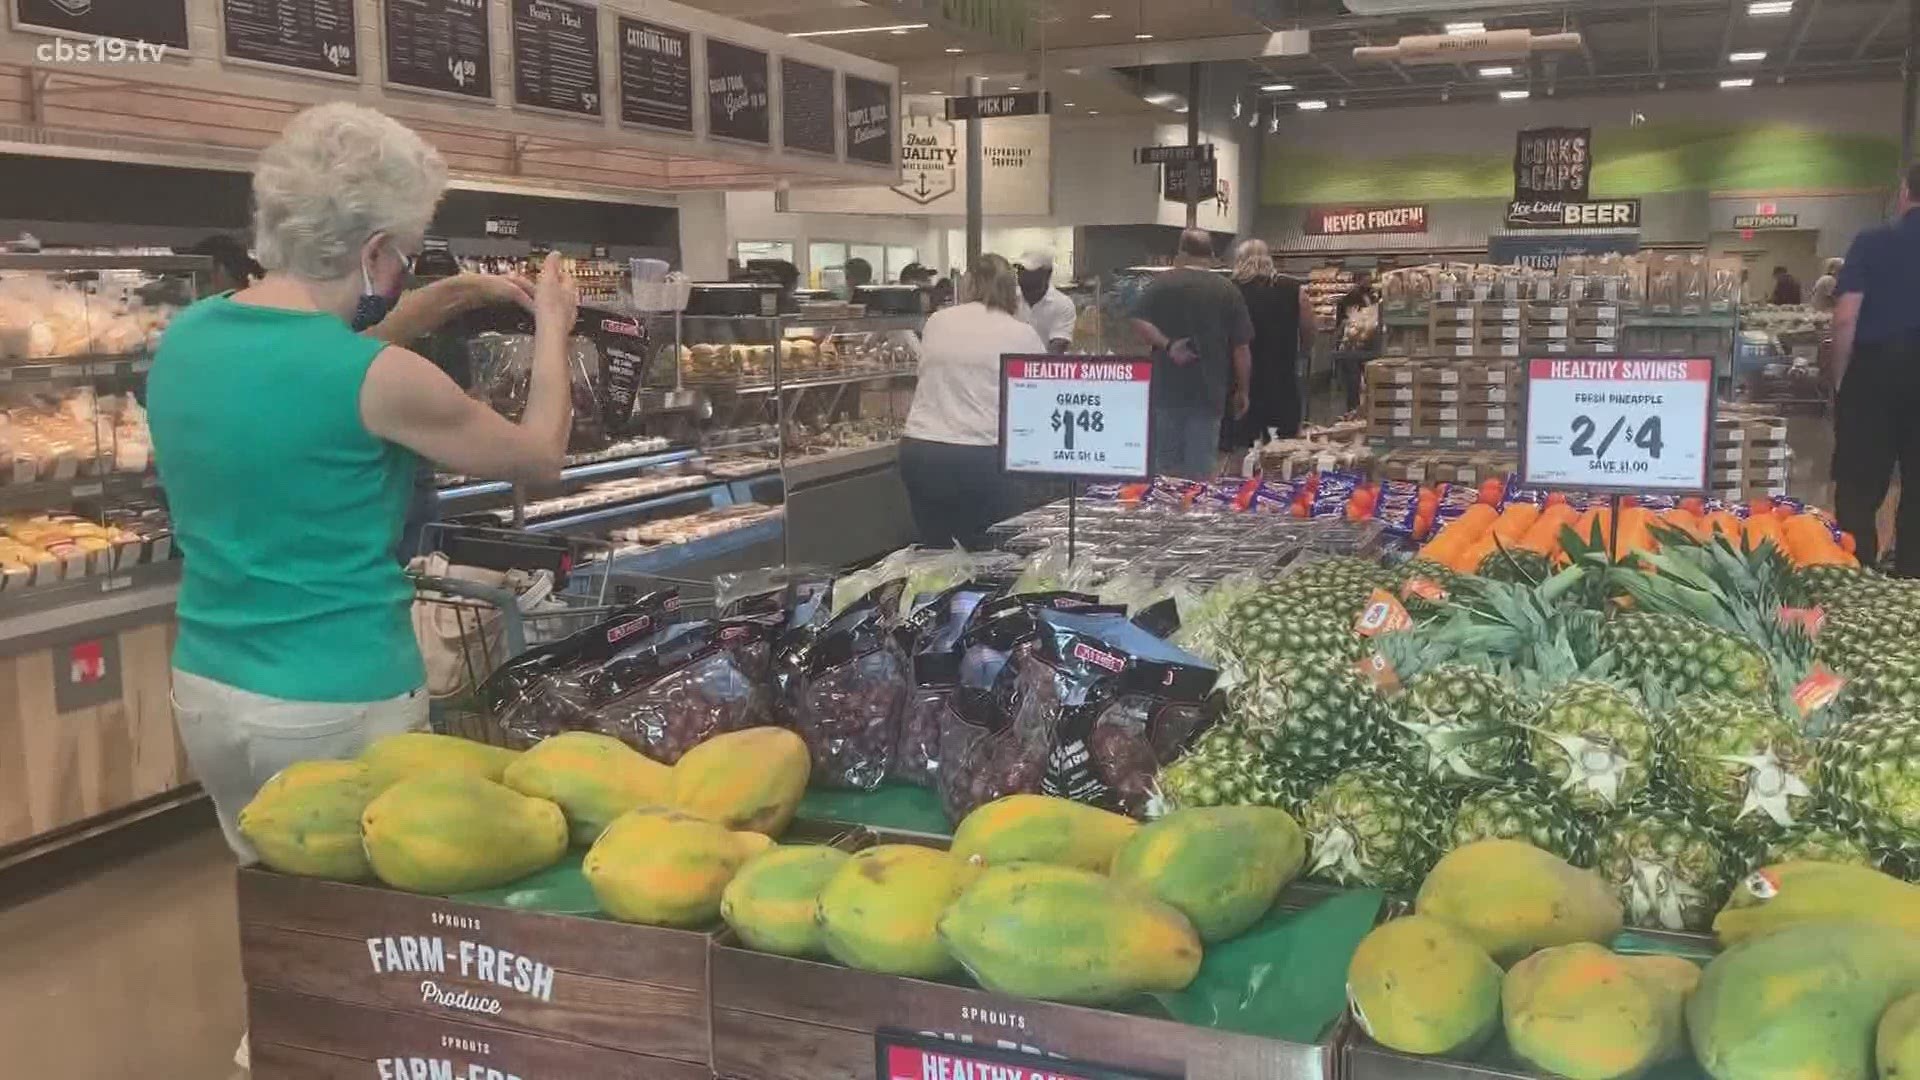 Sprouts Farmers Market is open 7 a.m. until 10 p.m. seven days a week.